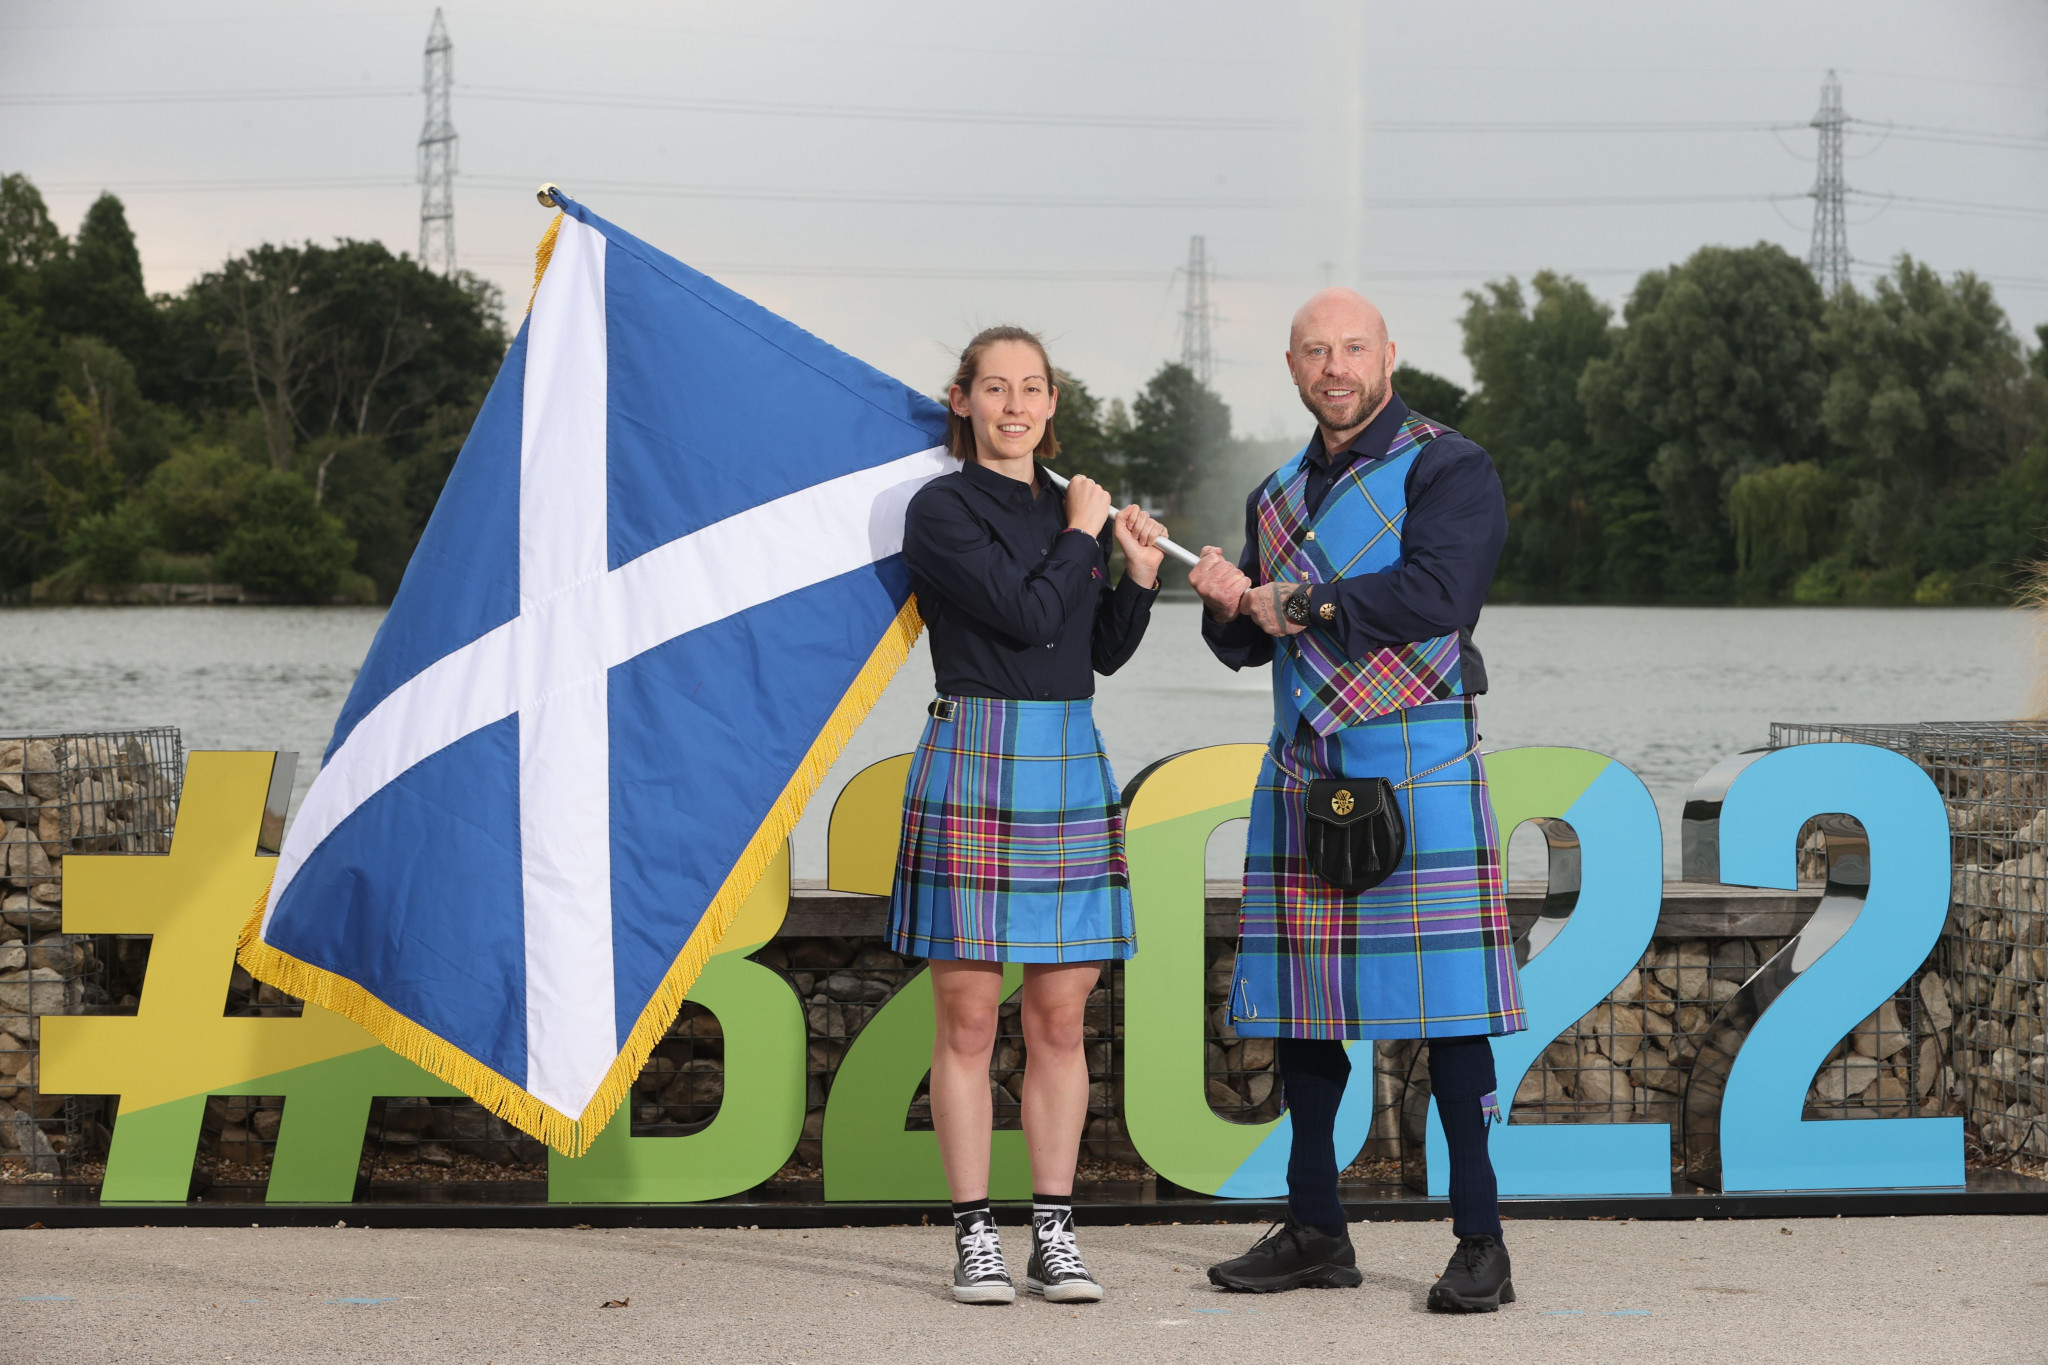 Badminton player Kirsty Gilmour and Para-powerlifter Micky Yule will share flagbearing duties for Scotland at tomorrow's Birmingham 2022 Opening Ceremony ©Team Scotland